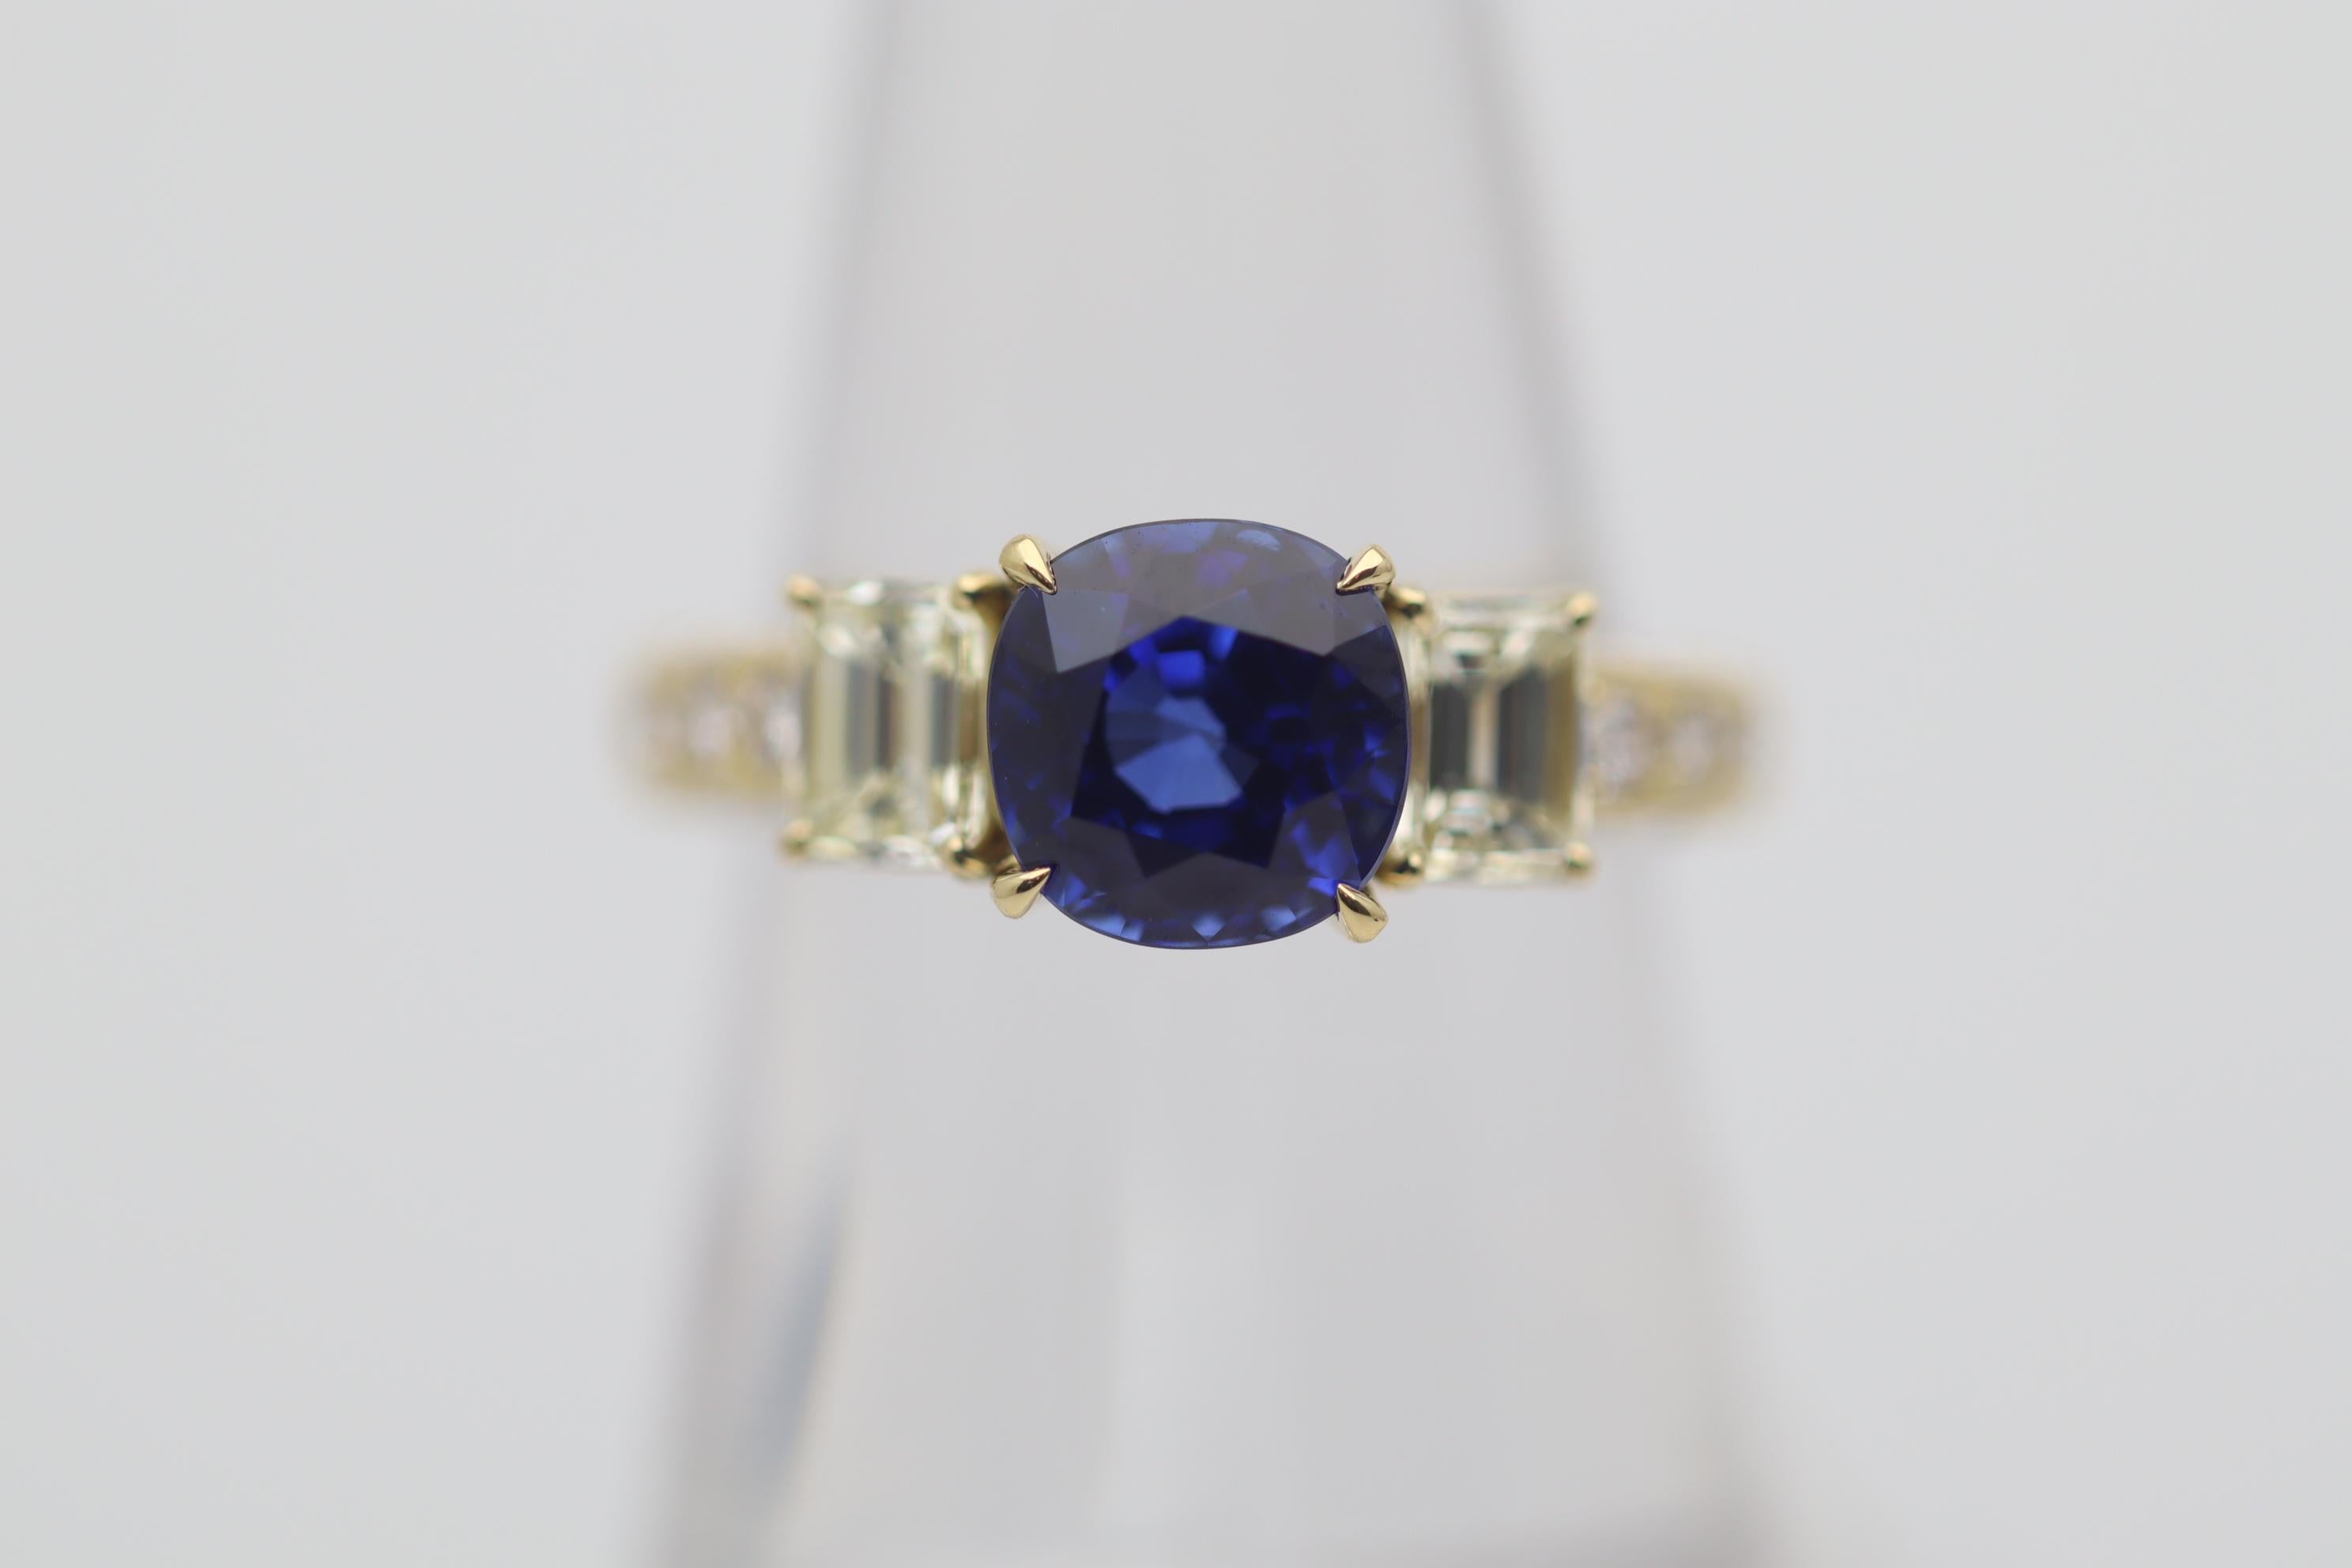 A superb sapphire weighing a respectable 2.86 carats takes center stage of this gold and diamond ring. The sapphire has a bright rich electric blue color with excellent scintillation. It is complemented by two emerald-cut diamonds set on its sides